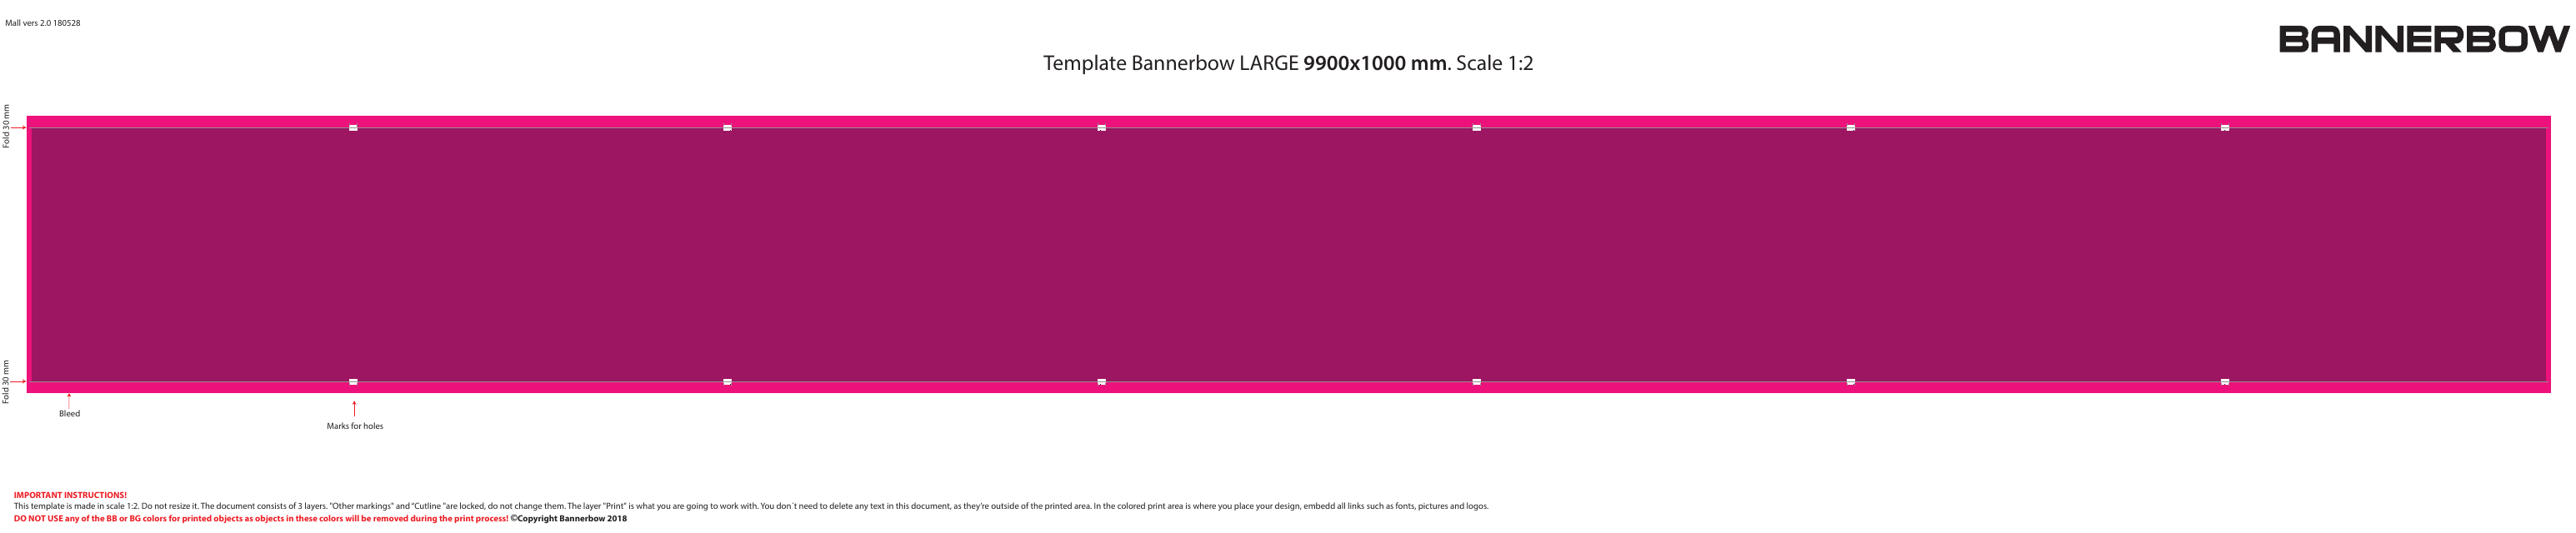 9900x1000mm Banner Print Template - Bannerbow